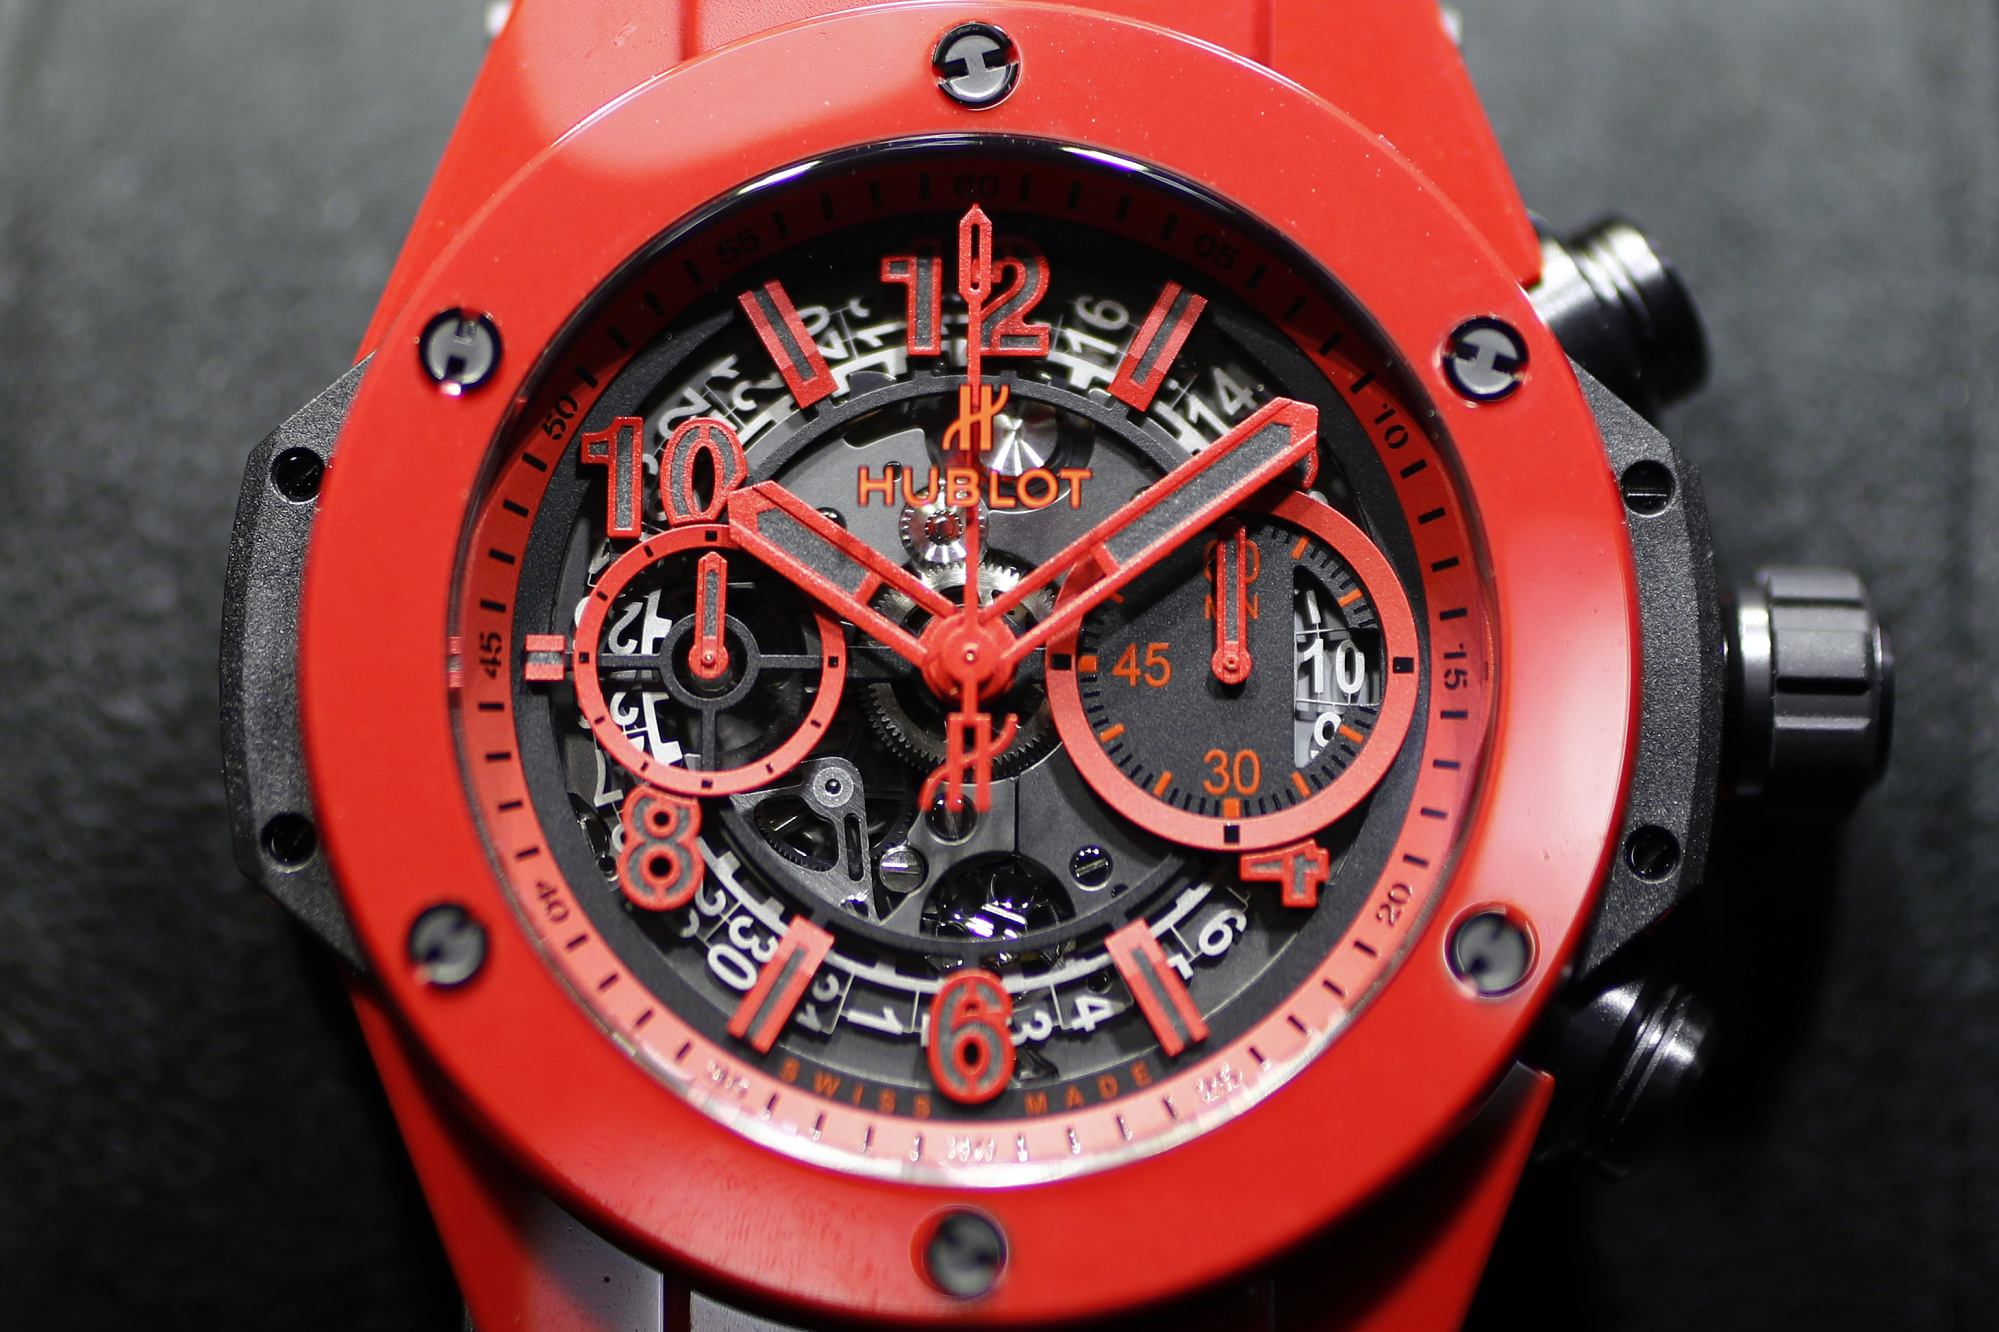 Hublot launches 3 Big Bang watches including Bitcoin timepiece